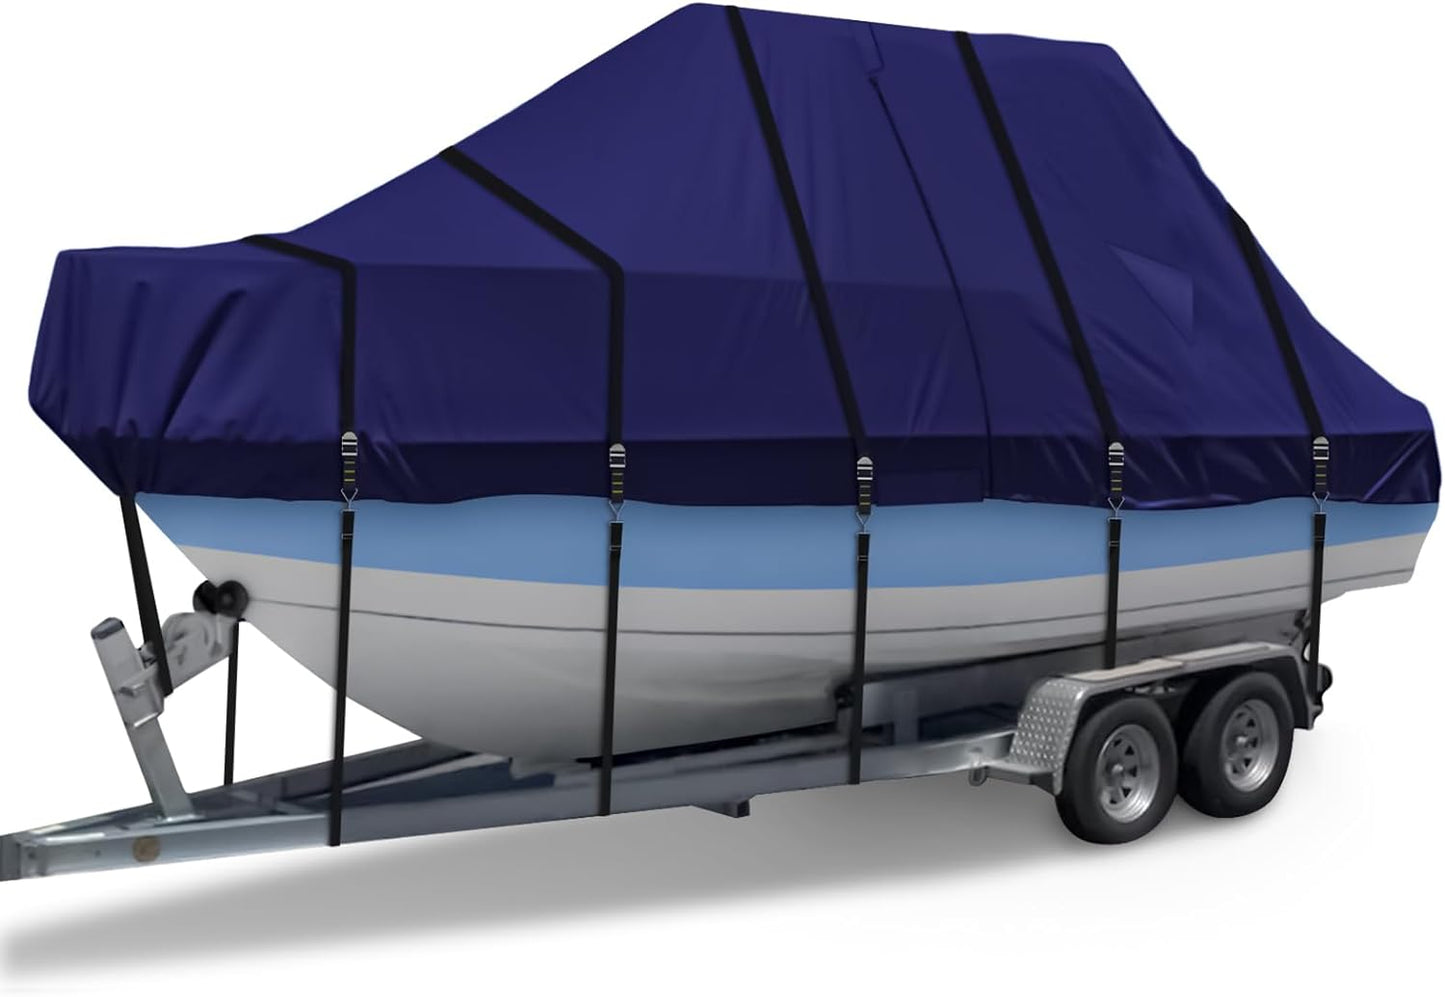 Zenicham 900D T Top Boat Cover - Heavy Duty Boat Cover, Waterproof T Top Hard Top Boat Cover, Trailerable Center Console Boat Cover, (Model - Length:26'-28', Beam Width: up to 116", Navy)